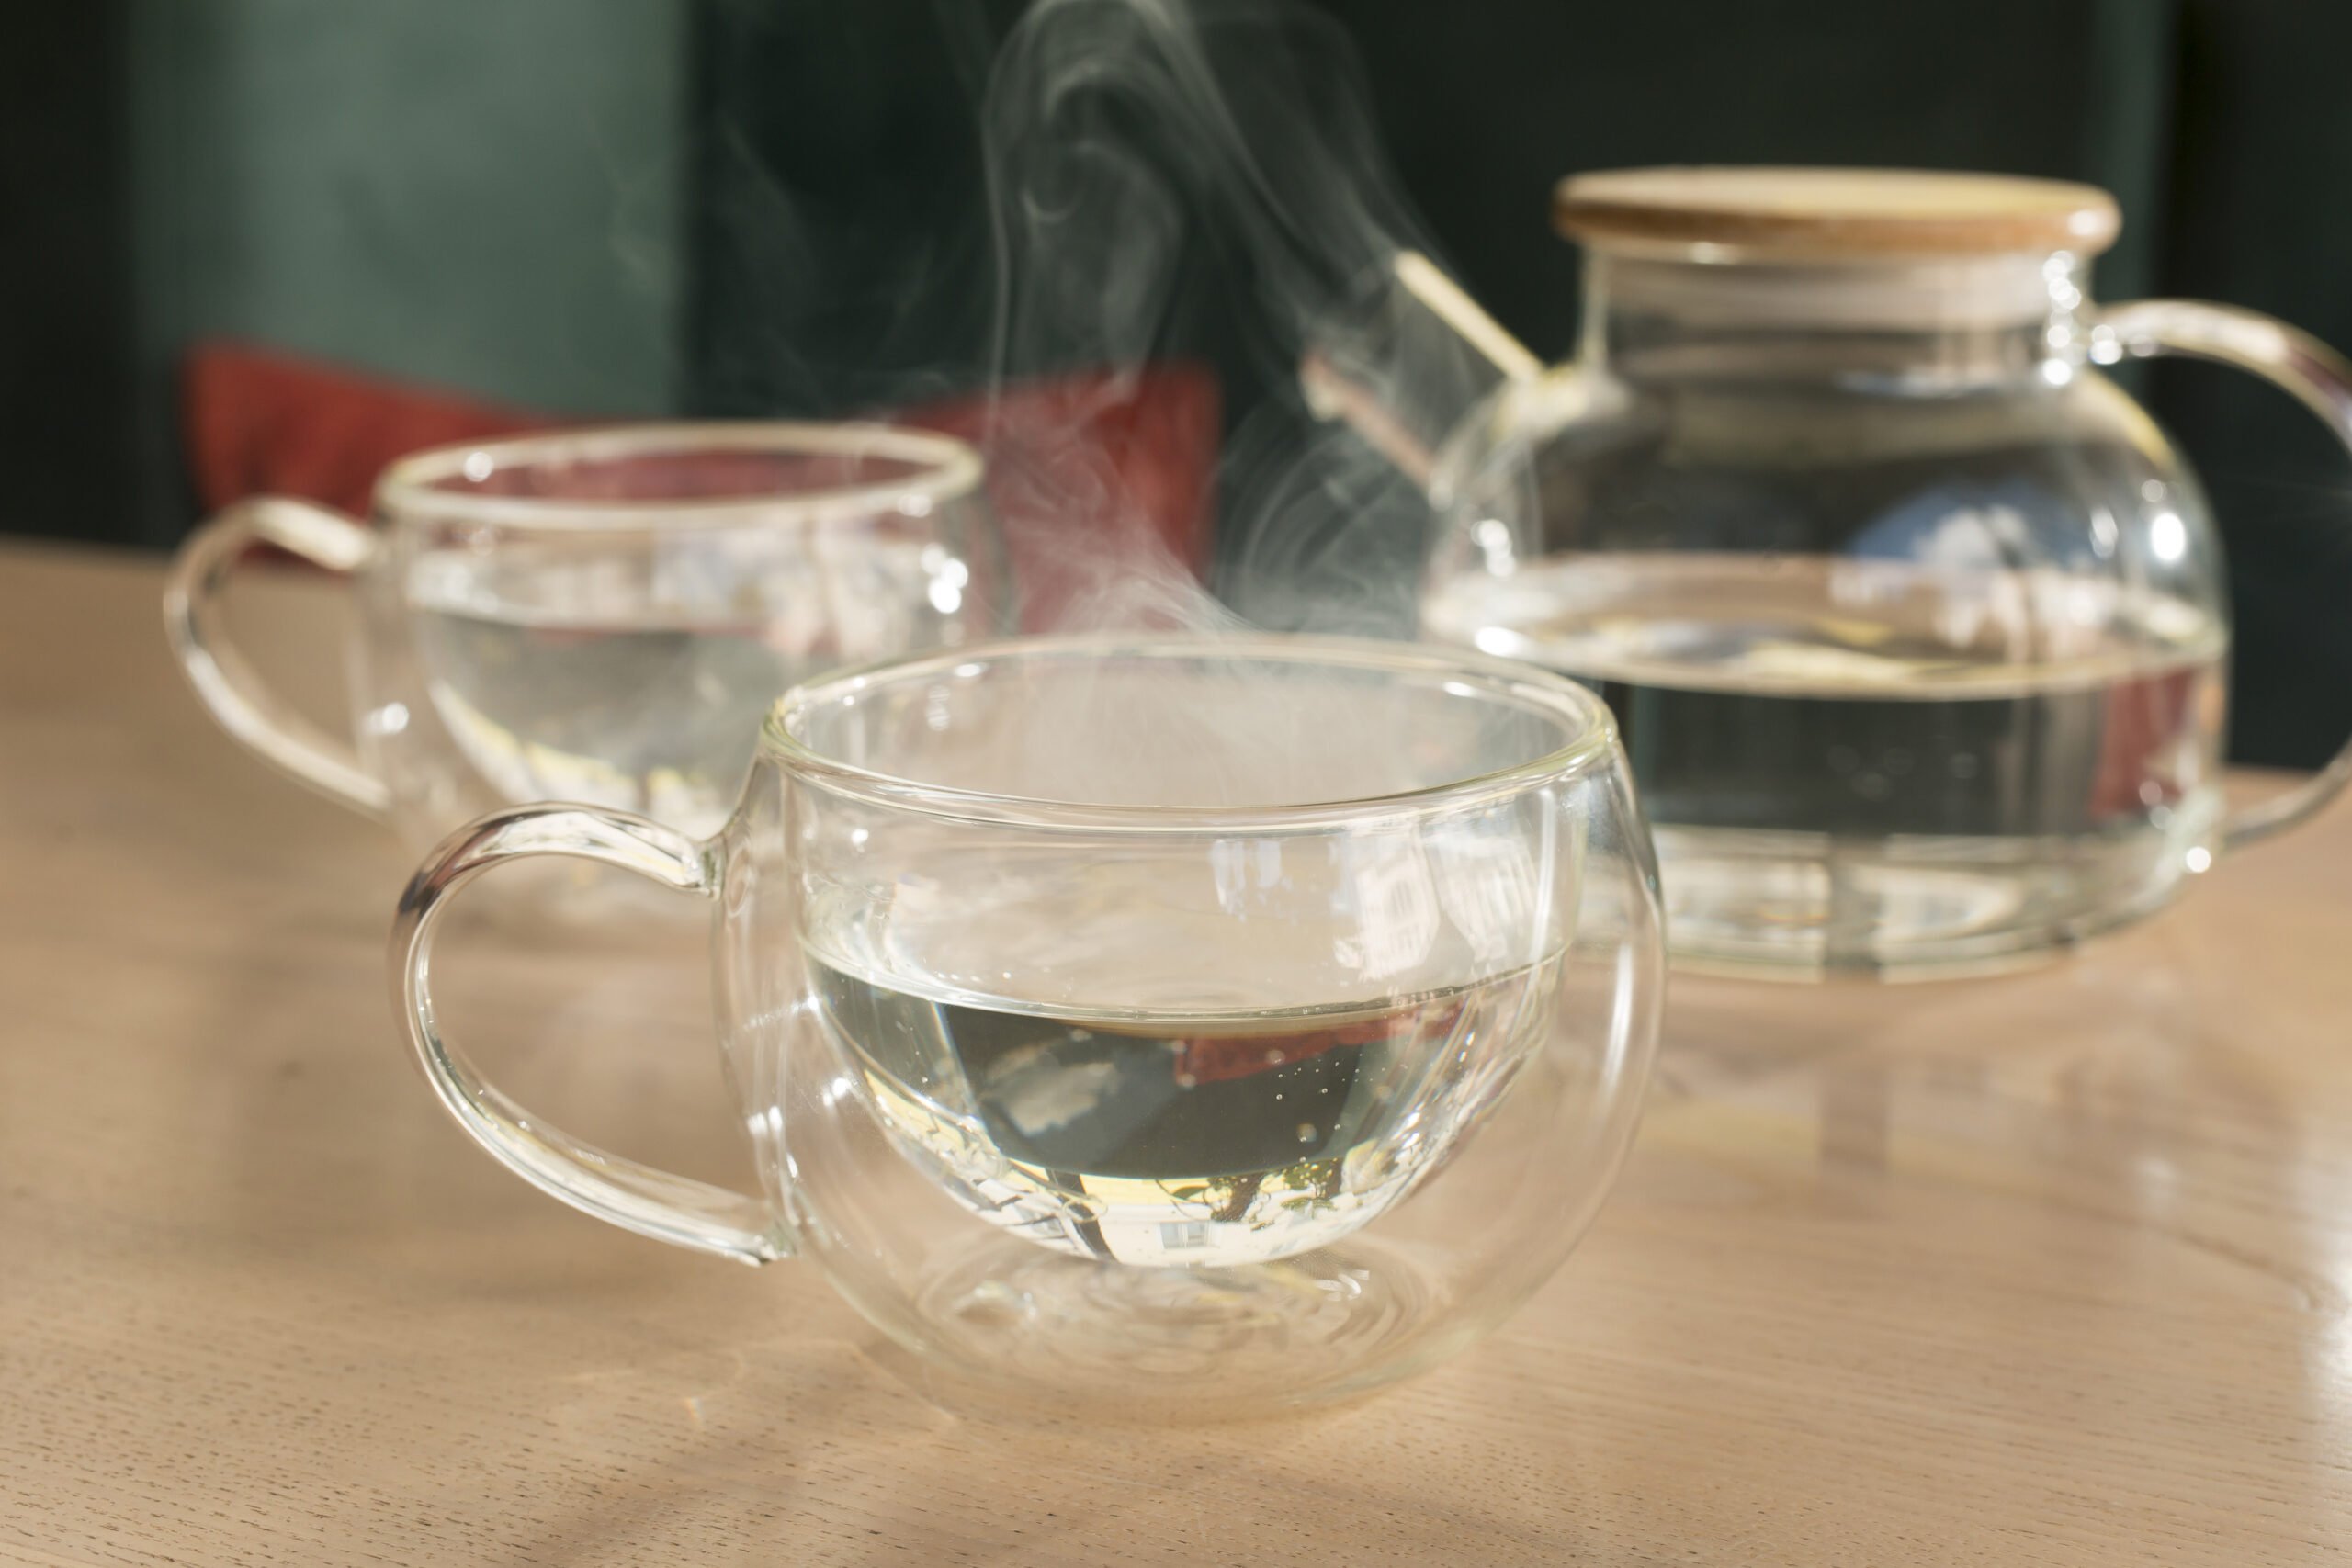 Health Benefits of Drinking Hot Water And How Can It Help Your Health?